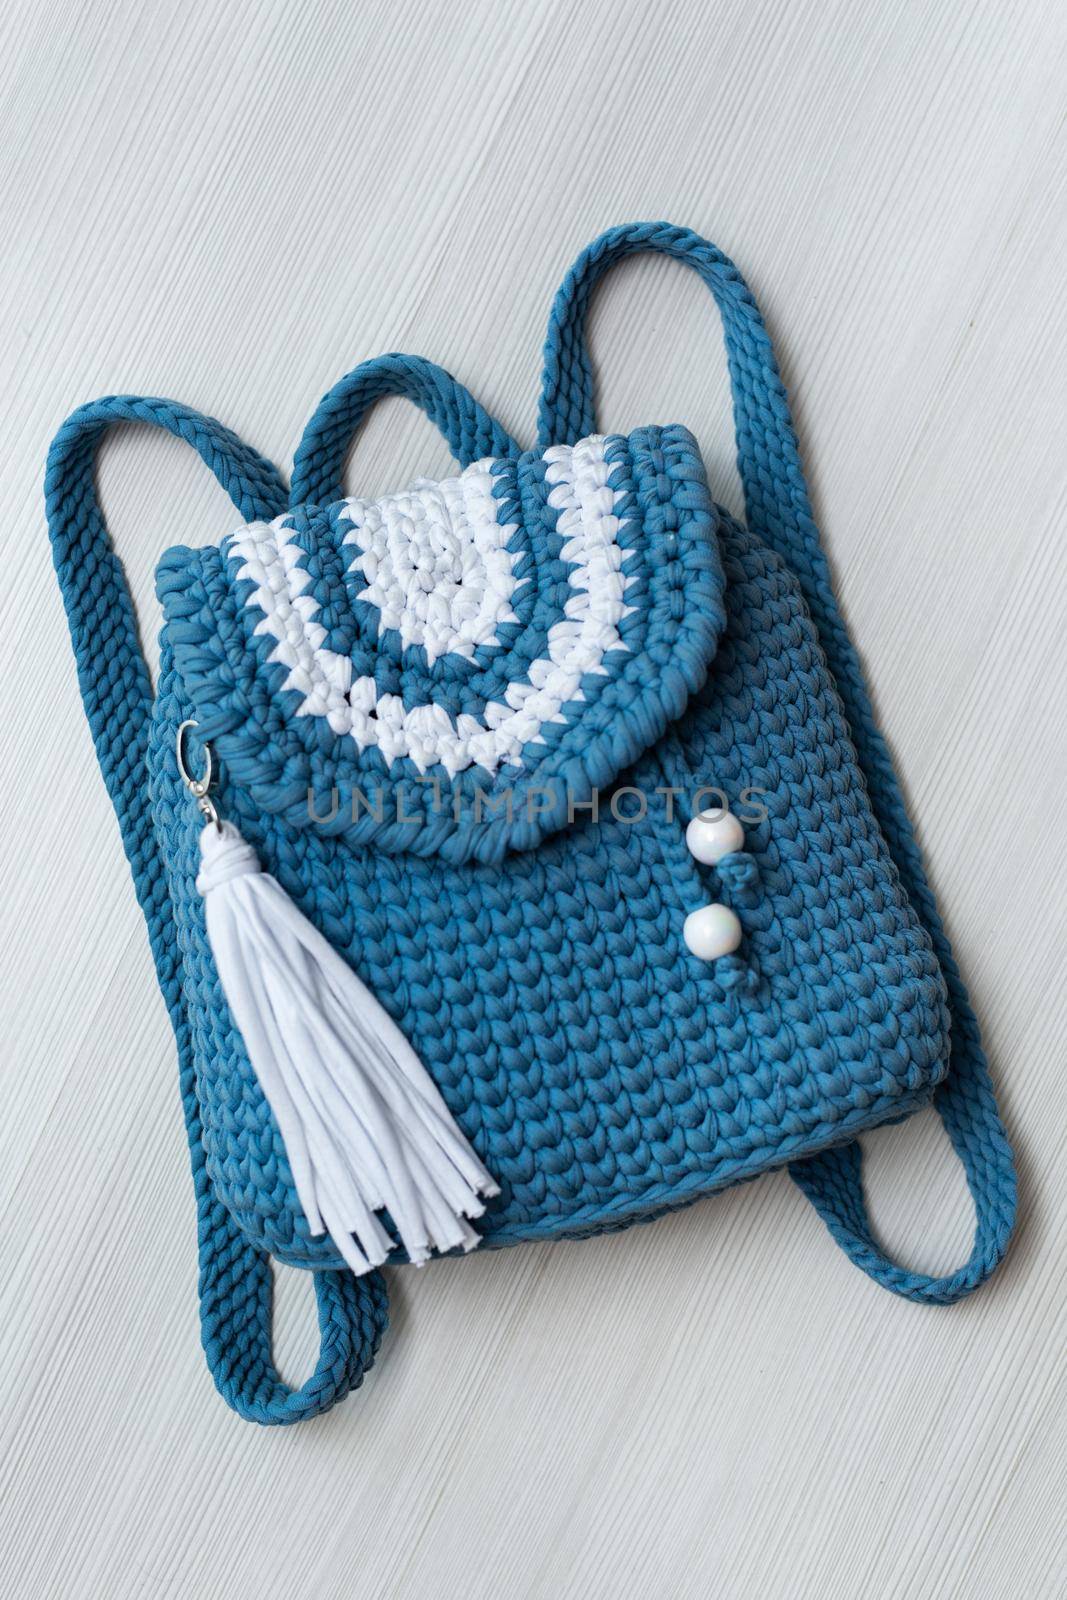 Small knitted blue backpack on a white background